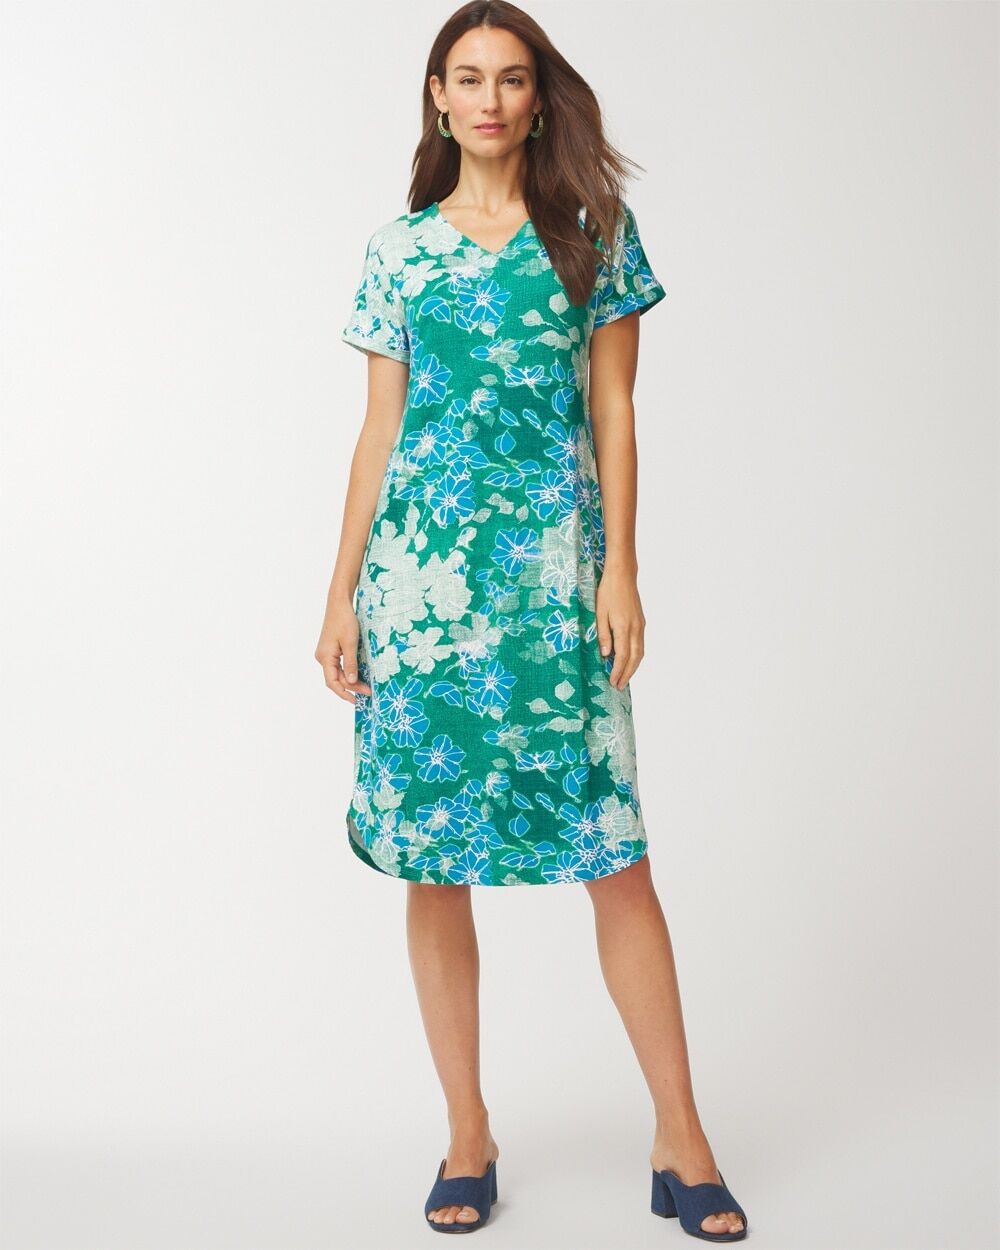 Chico's Off The Rack Women's Prairie Flowers Shirttail Midi Dress in Lotus Leaf Size 12/14   Chico's Outlet, Spring Dresses - Lotus Leaf - Women - Size: 12/14